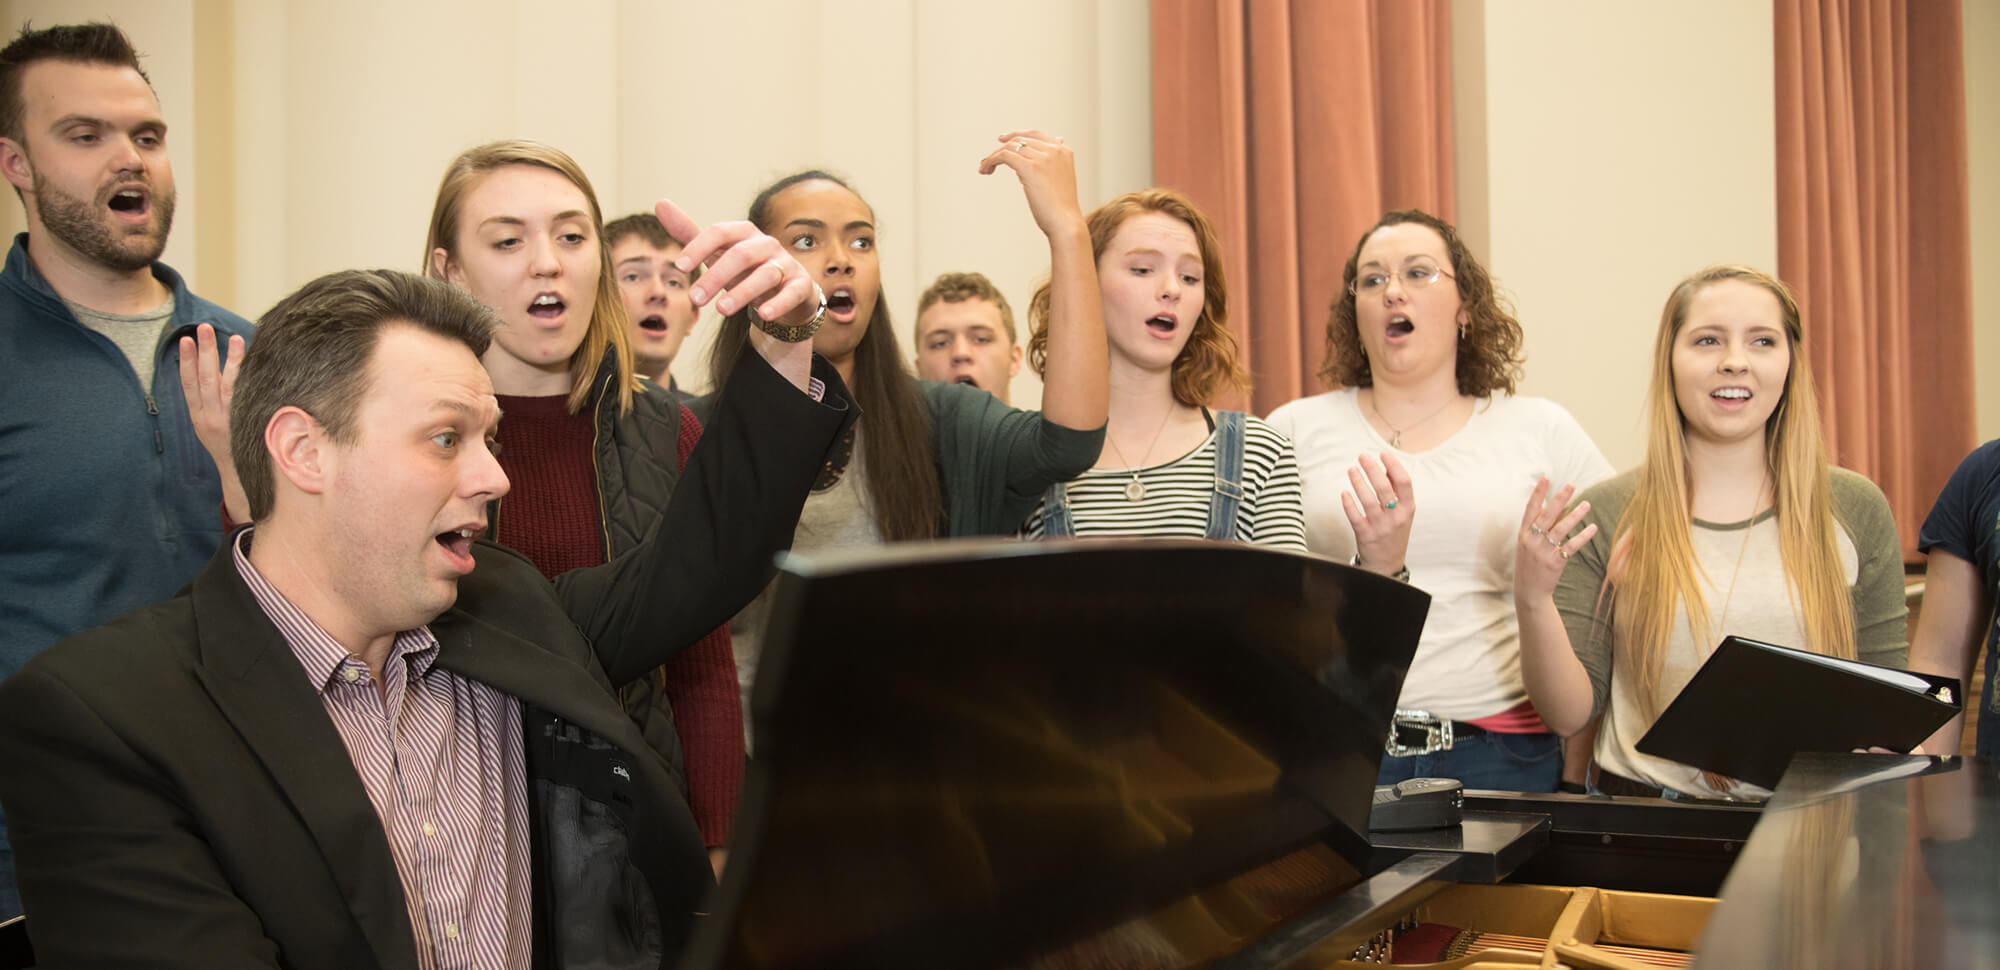 Students practice vocal exercises while gather around an instructor playing the piano.